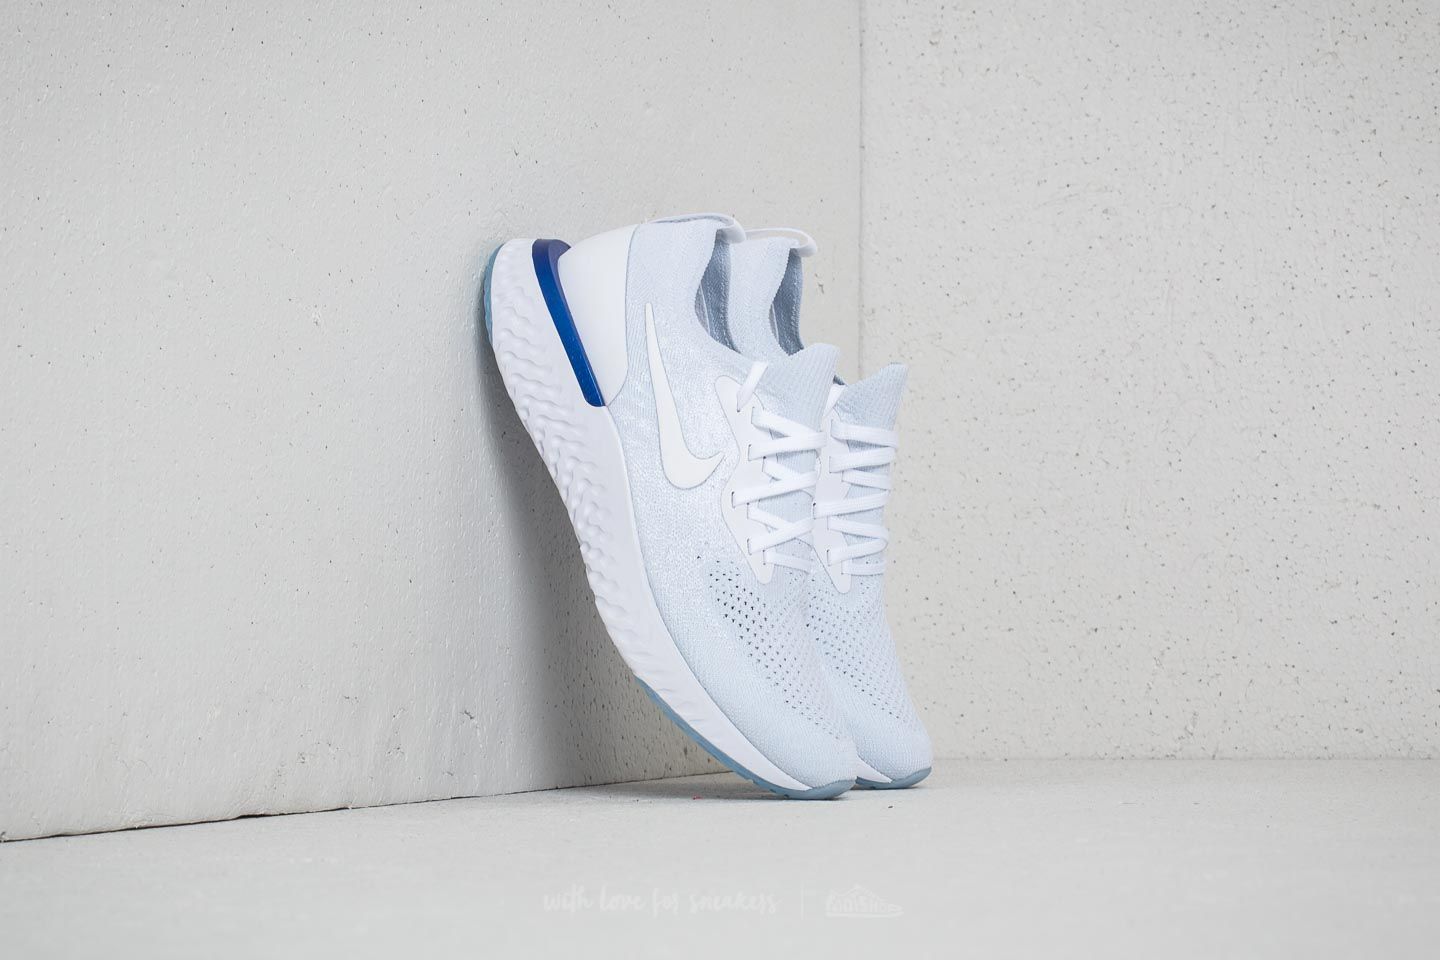 Chaussures et baskets femme Nike Epic React Flyknit WMNS White/ White-Racer Blue